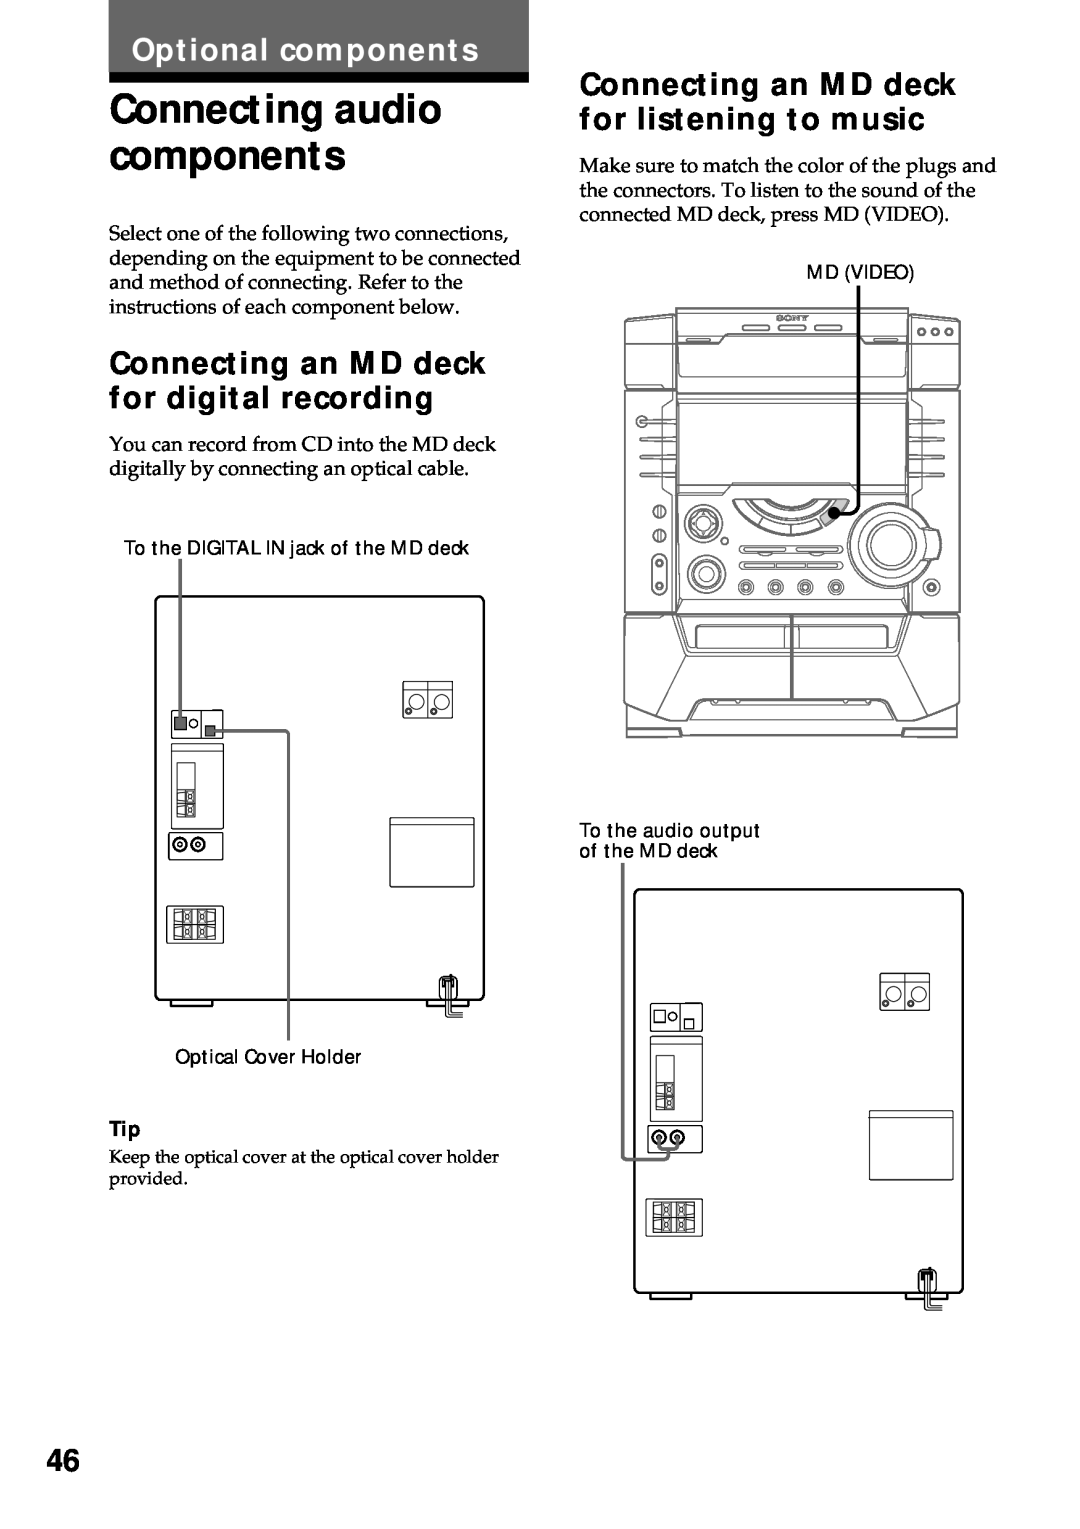 Sony MHC-VX55, MHC-VX77 Connecting audio components, Optional components, Connecting an MD deck for digital recording 